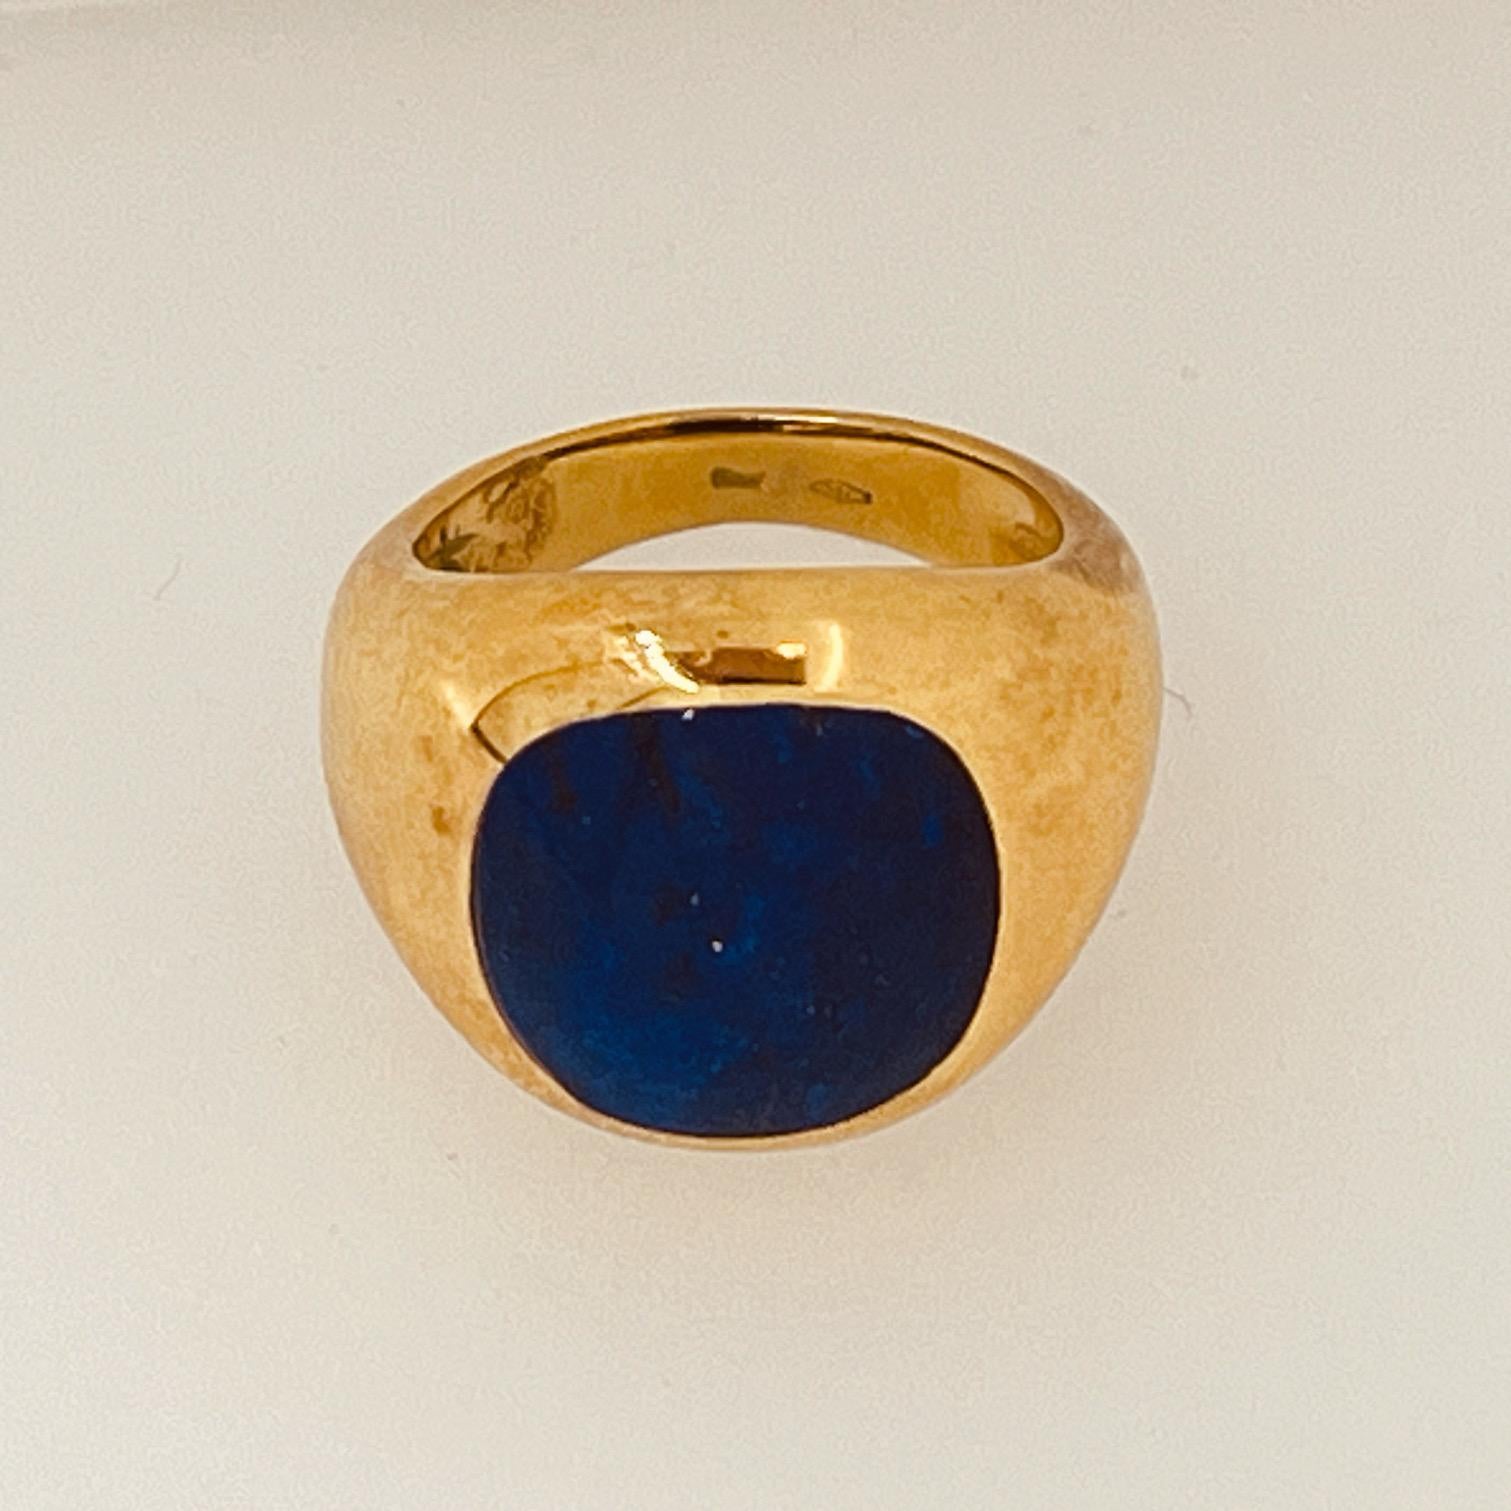 A Cushion Shaped Lapis Lazuli Mounted In a 18 Carat Yellow Gold Signet Ring  For Sale 3